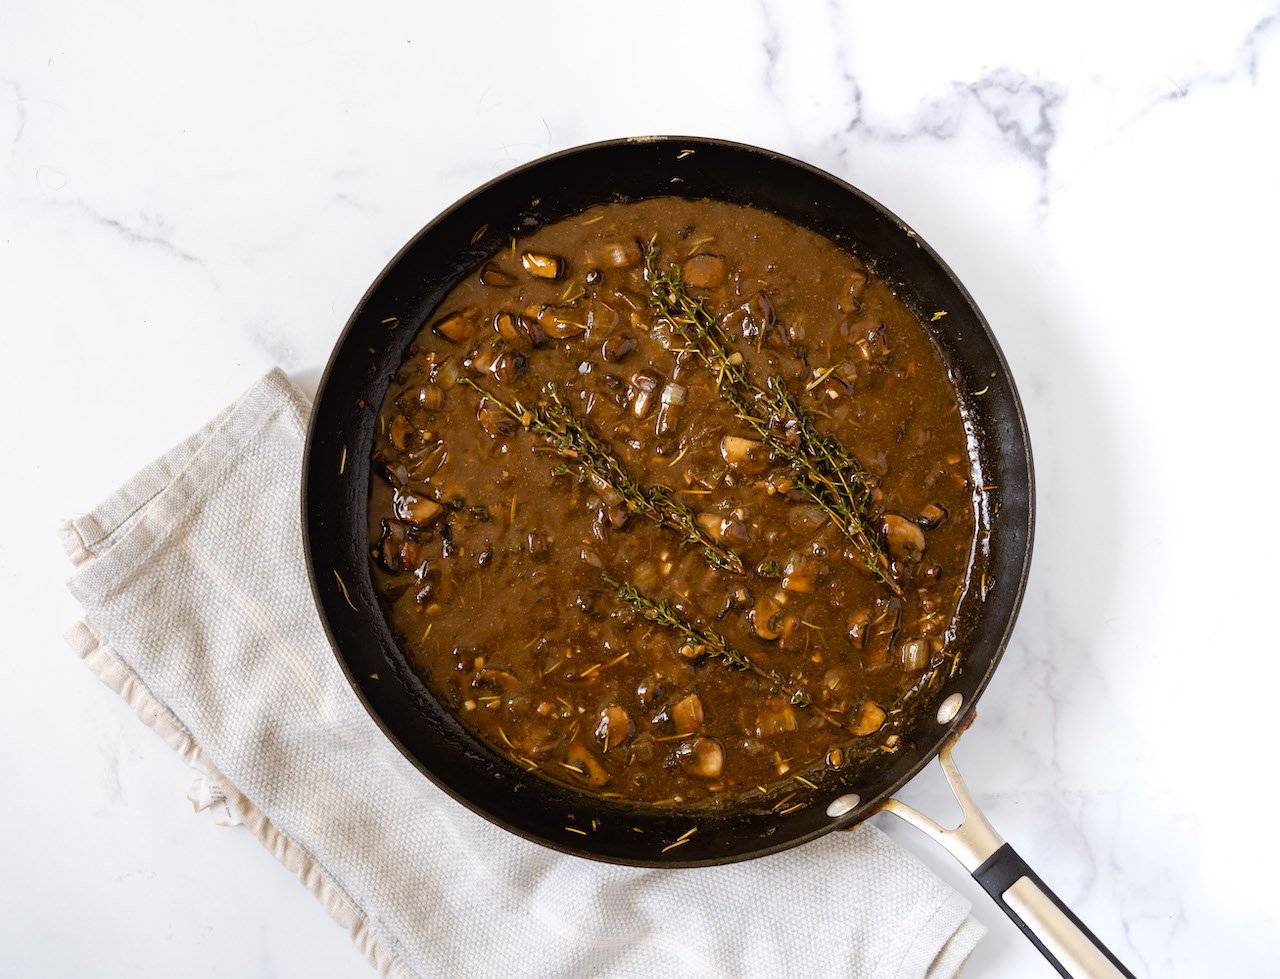 Sauce pan of vegan mushroom gravy with SkinnyFit Super Youth Collagen for healthy Thanksgiving sides ideas.